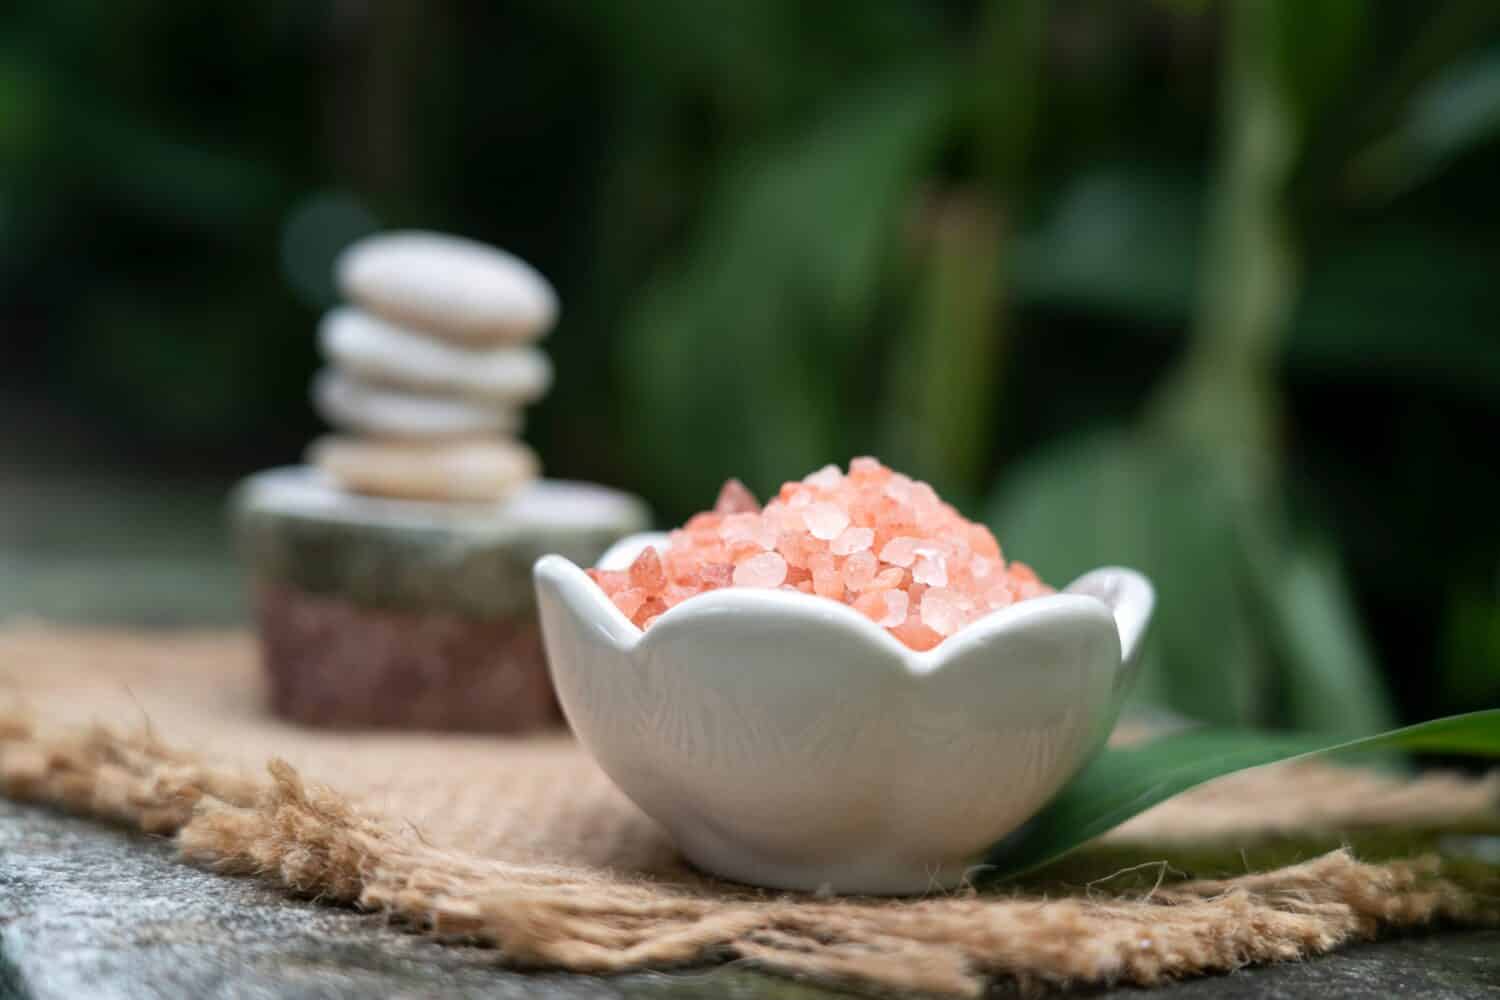 pink himalayan salt in white ceramic bowl in front of  meditation stack stone  on green blurred background,  aromatherapy spa set concept. 